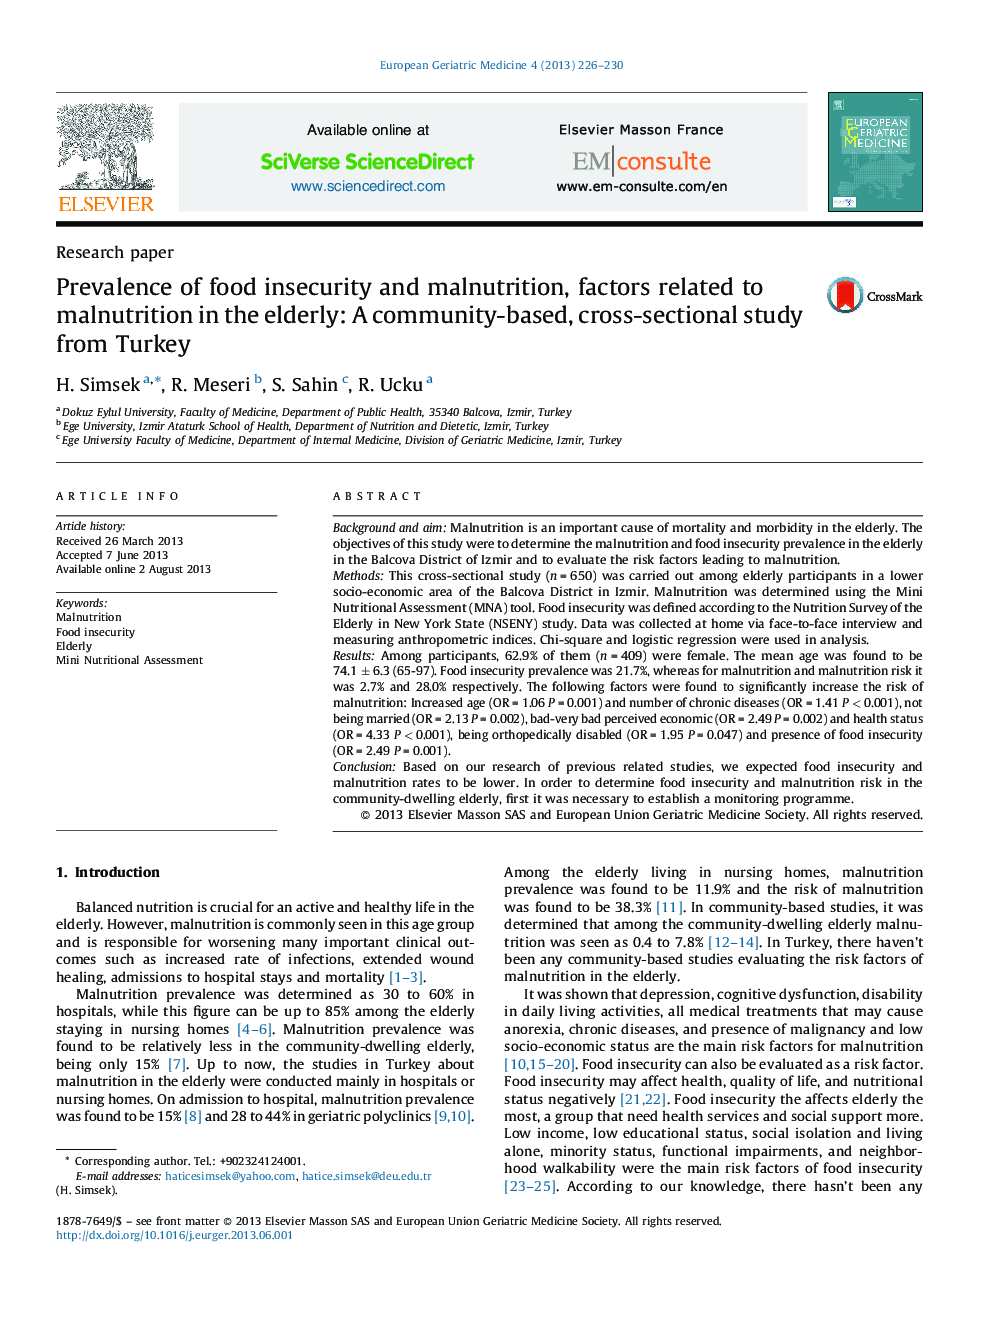 Prevalence of food insecurity and malnutrition, factors related to malnutrition in the elderly: A community-based, cross-sectional study from Turkey